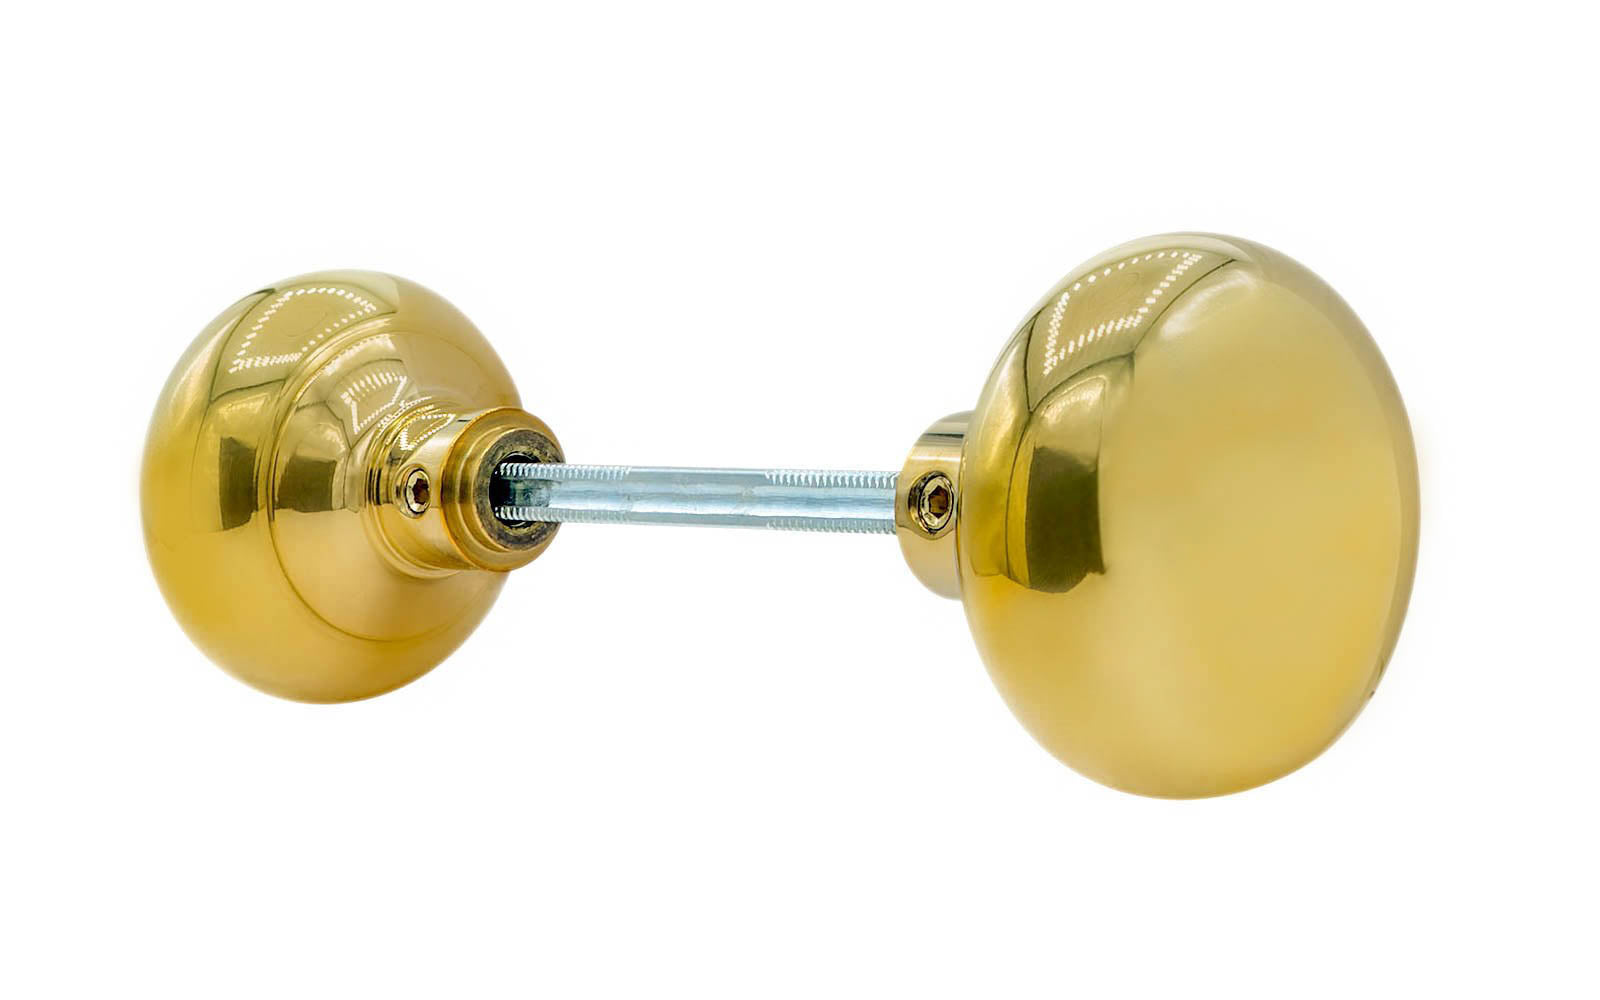 Solid Brass Core Classic Smooth Doorknob Set. Vintage-style Hardware · High quality & solid brass doorknob set with a classic & smooth design. The doorknob itself has a solid brass core making it very durable. - Non-Lacquered Brass